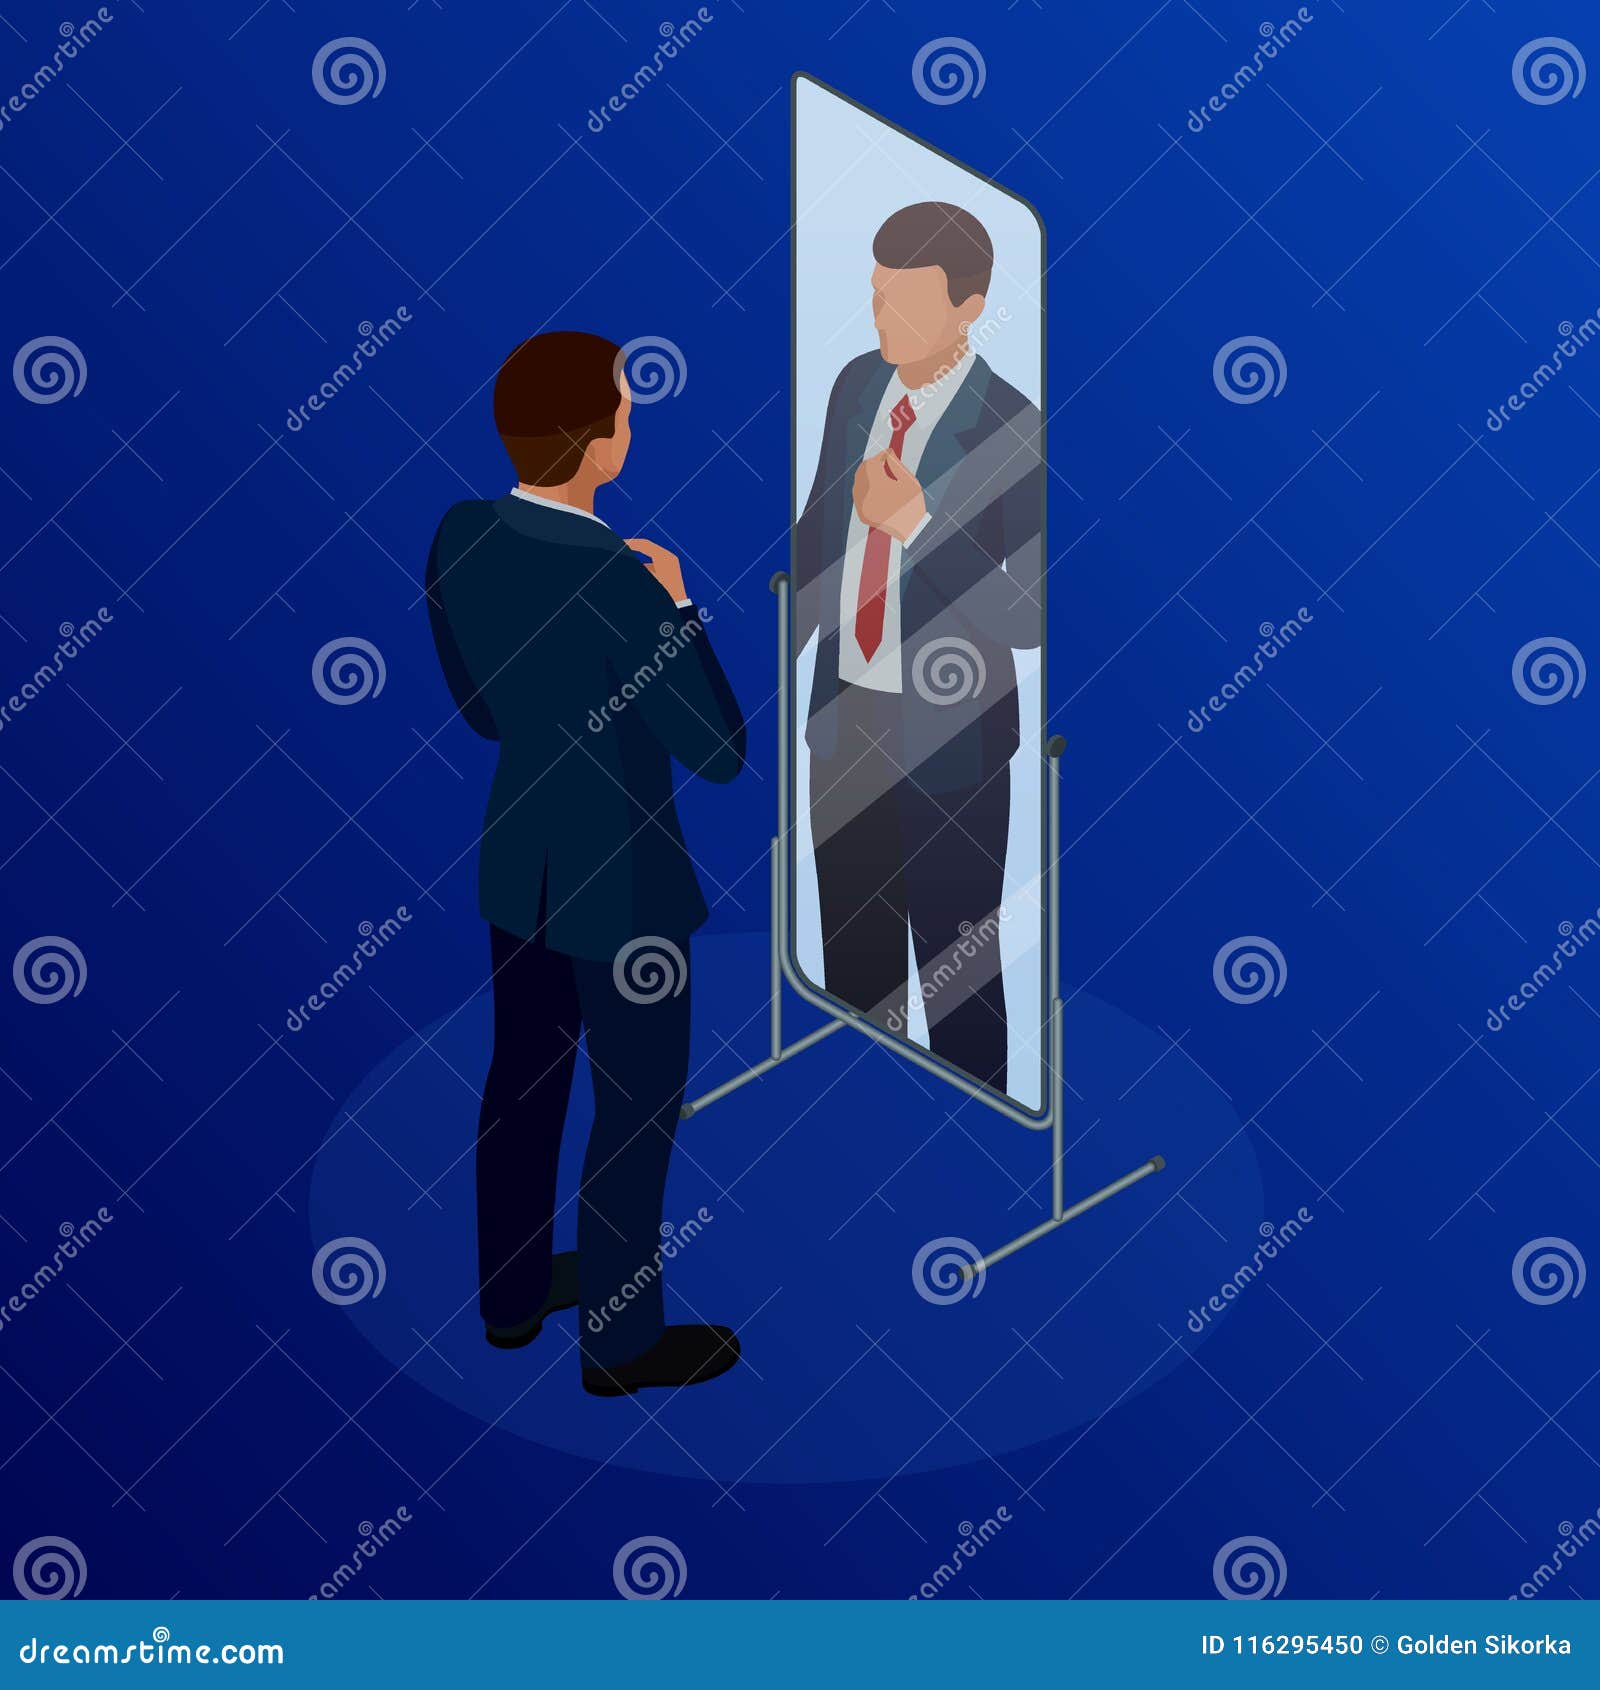 Isometric Businessman Adjusting Tie in Front of the Mirror. Man